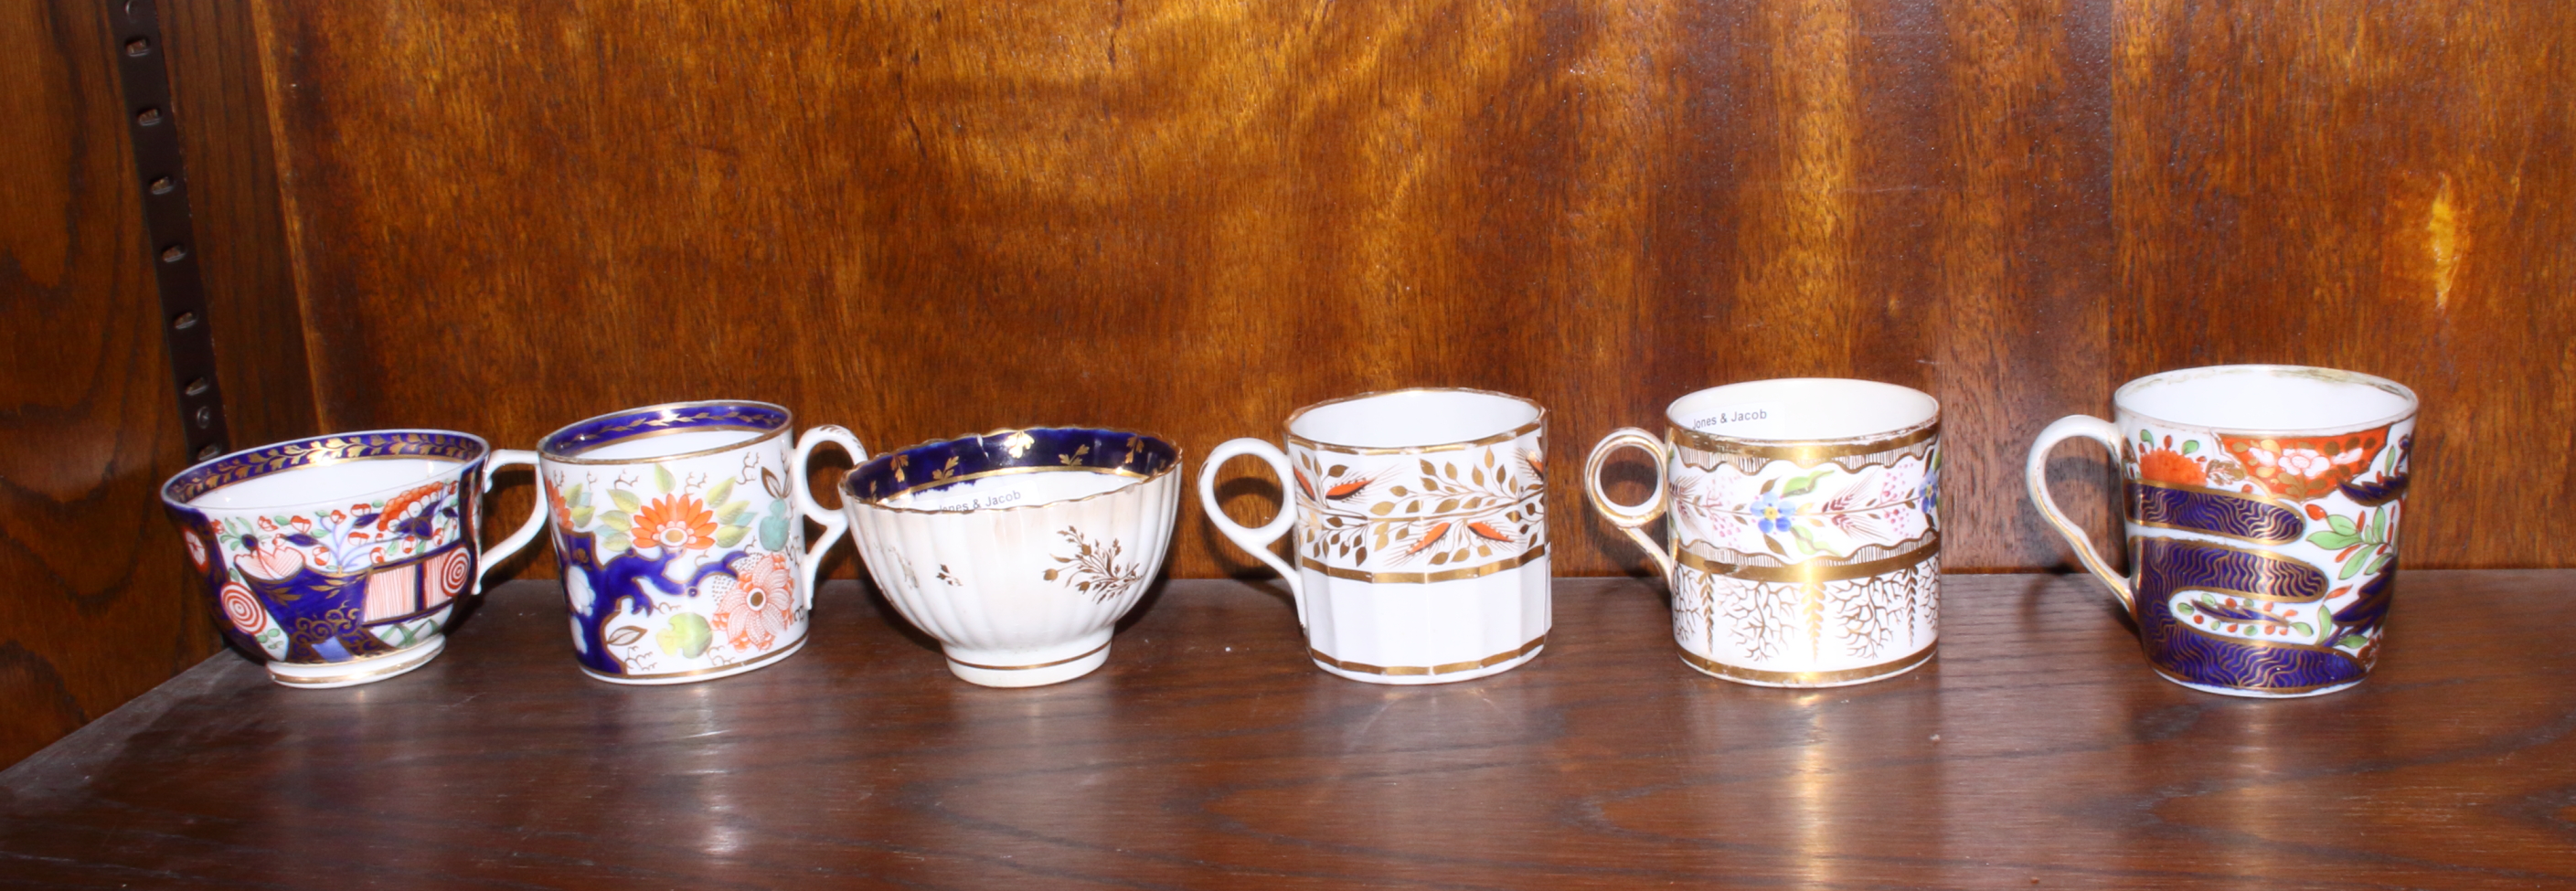 Five early 19th century English porcelain coffee cans, including Minton, Chamberlains Worcester "